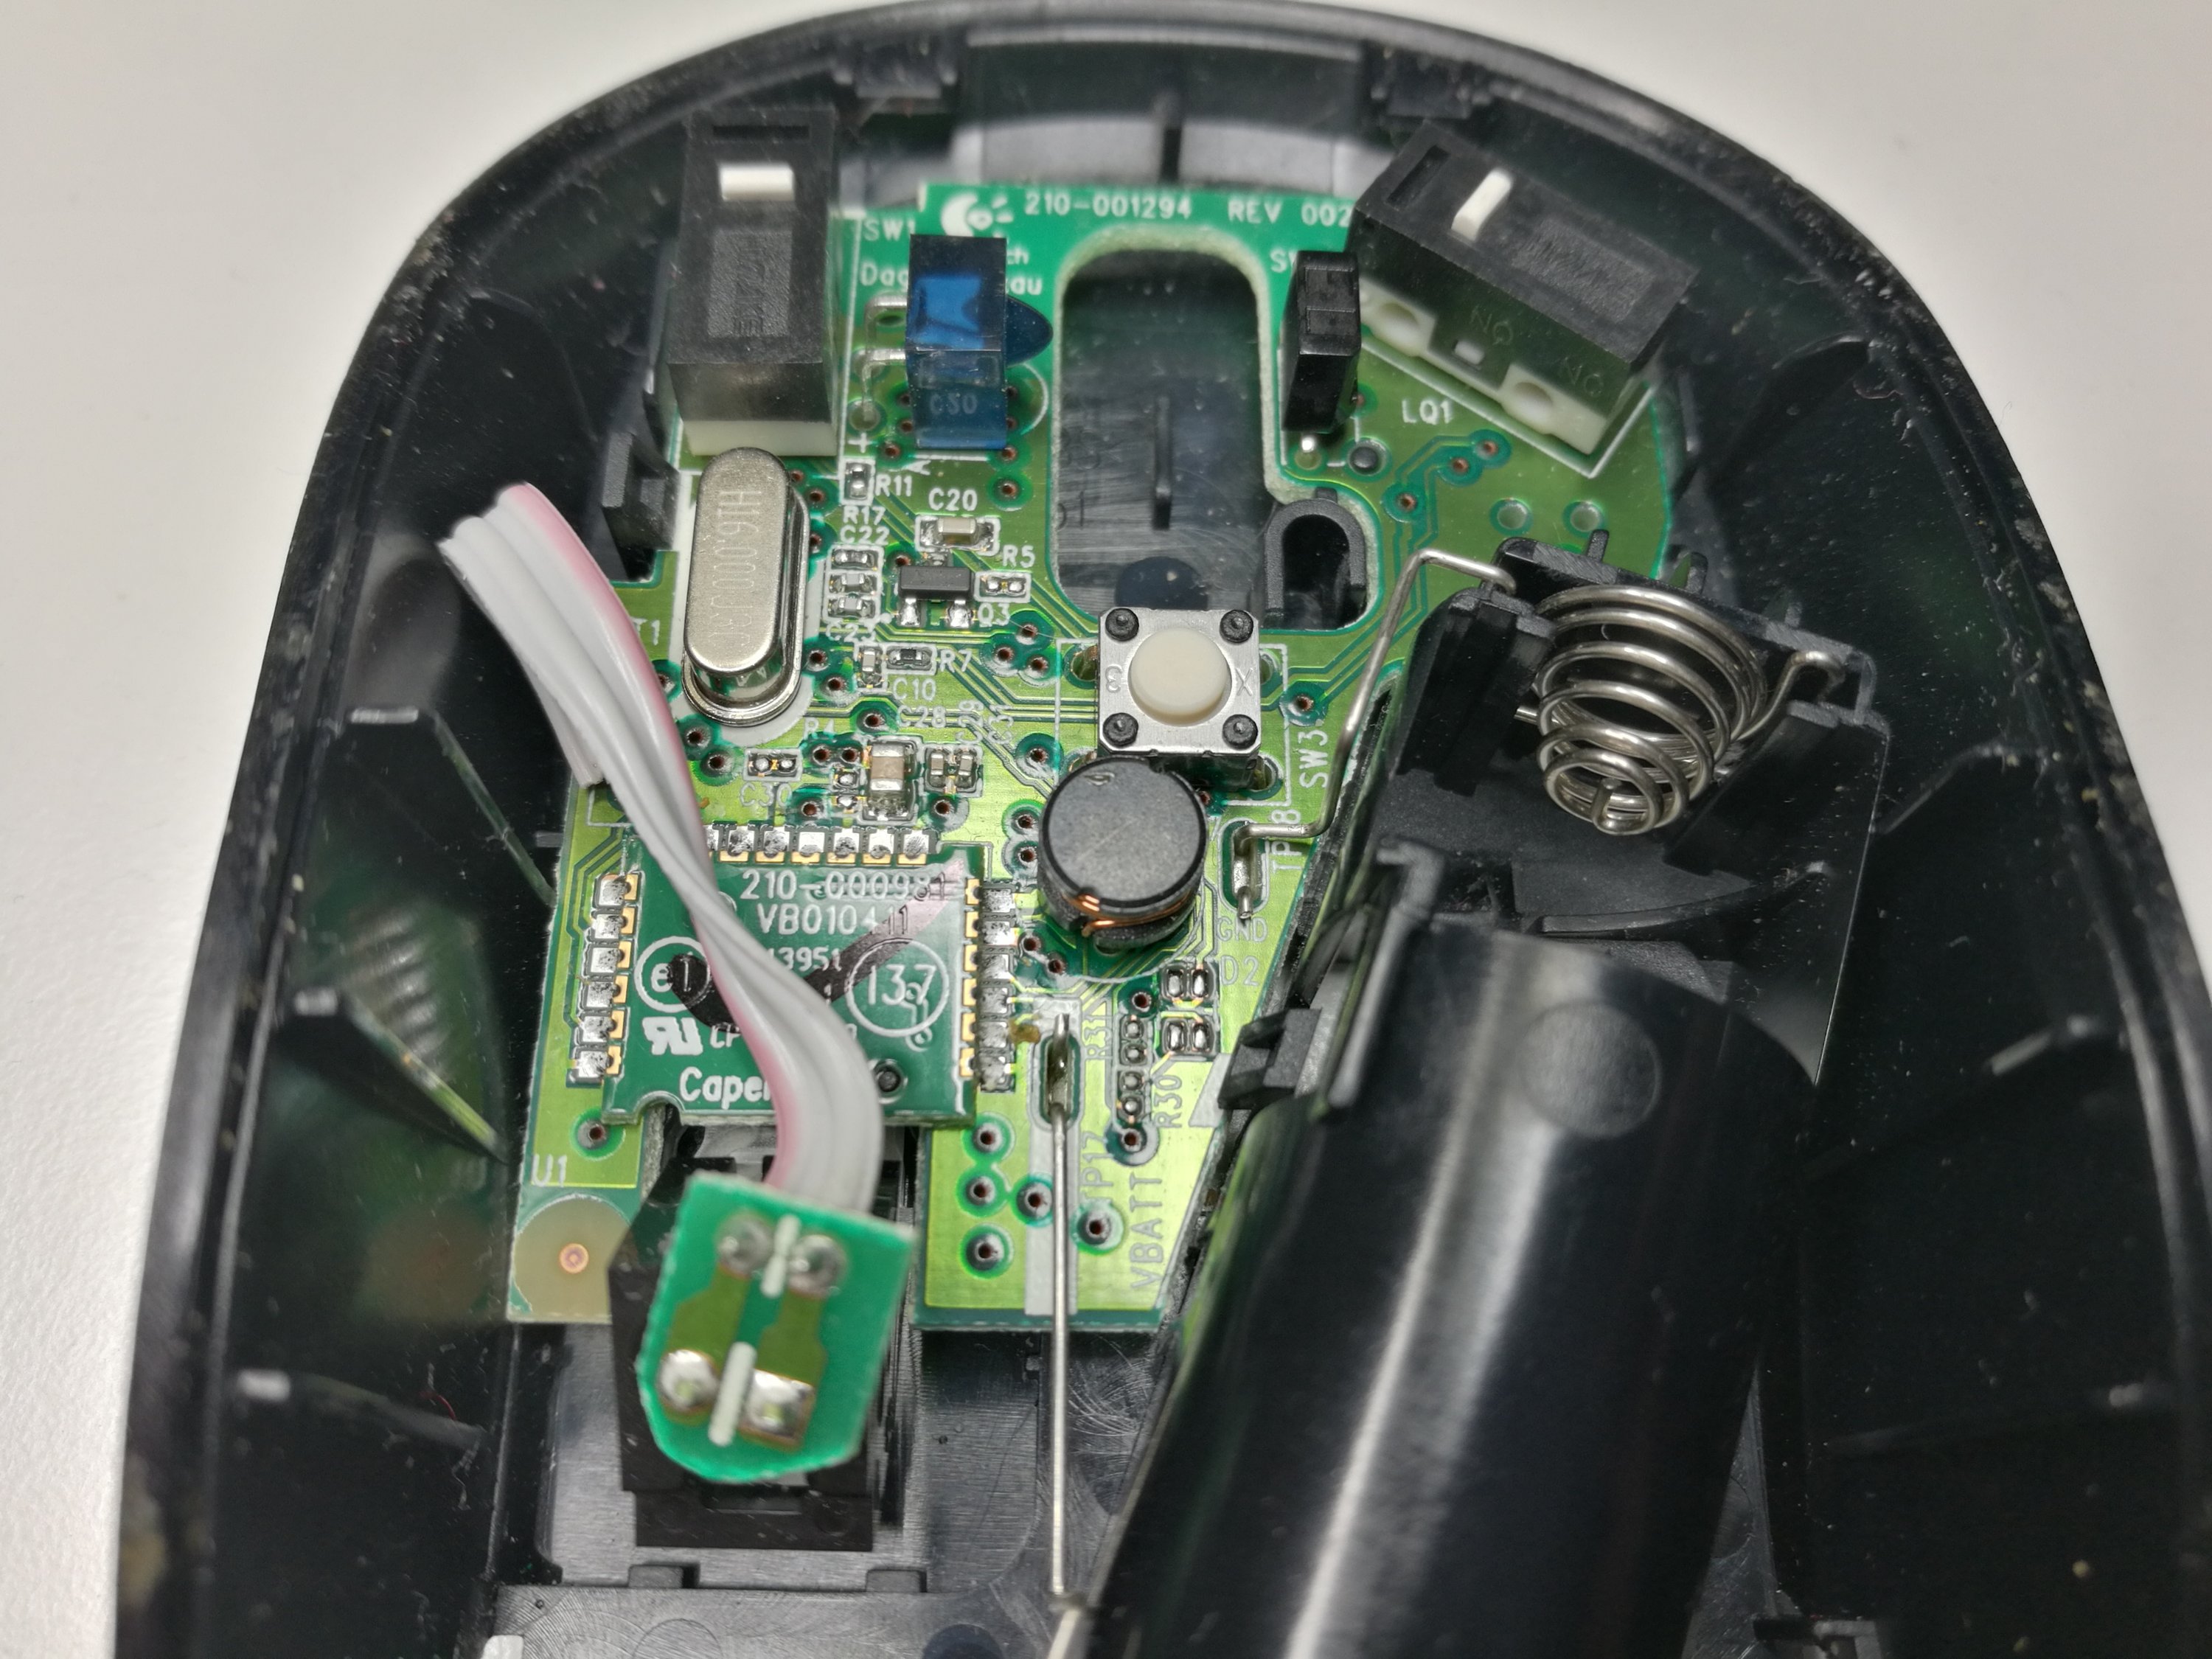 Logitech M185 Wireless Mouse Disassembly - iFixit Repair Guide